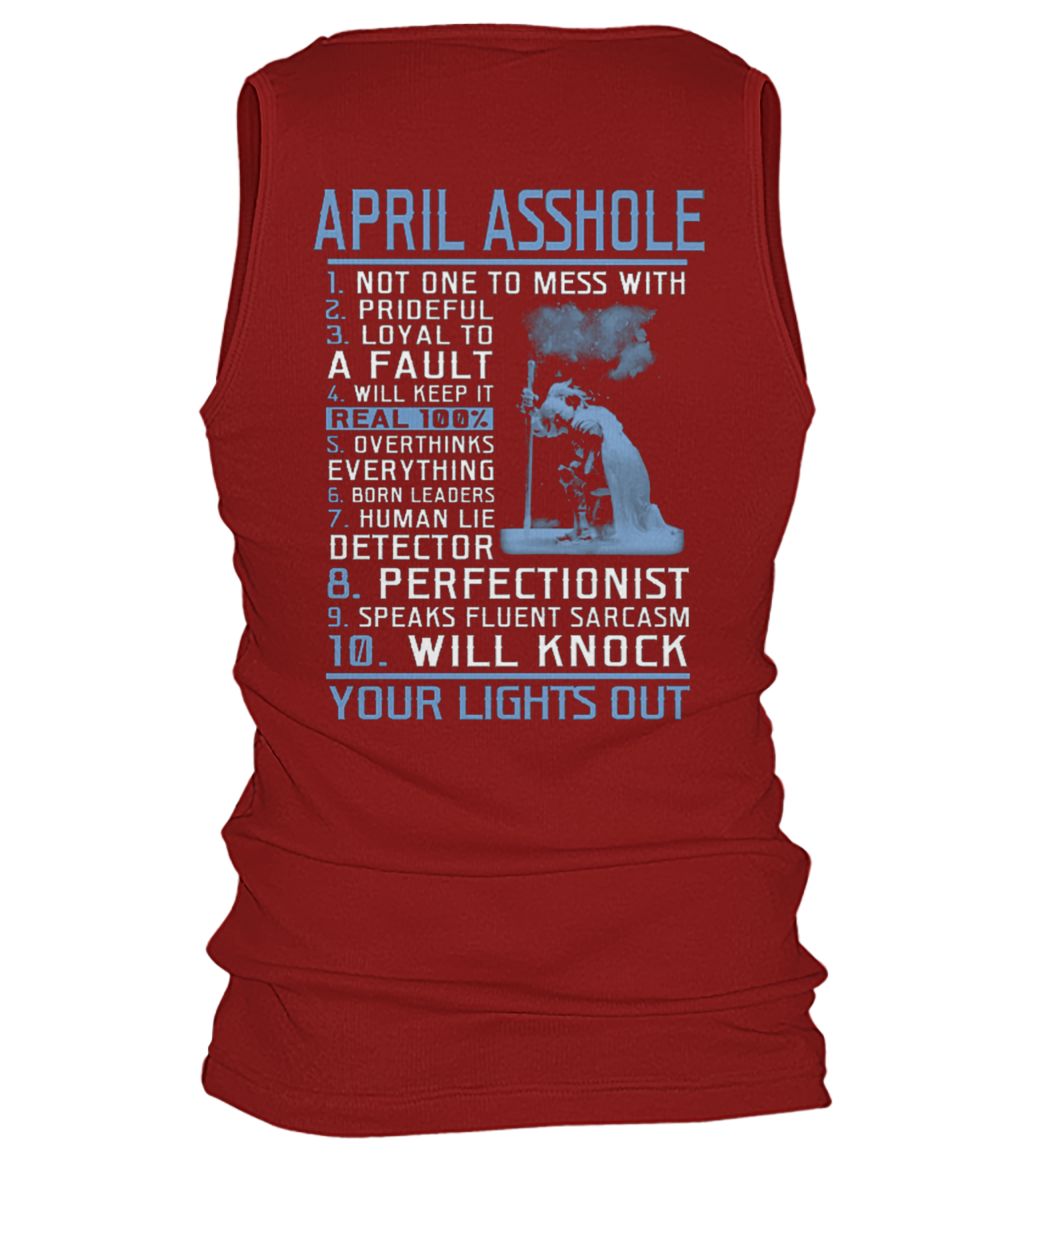 April asshole not one to mess with your light out men's tank top